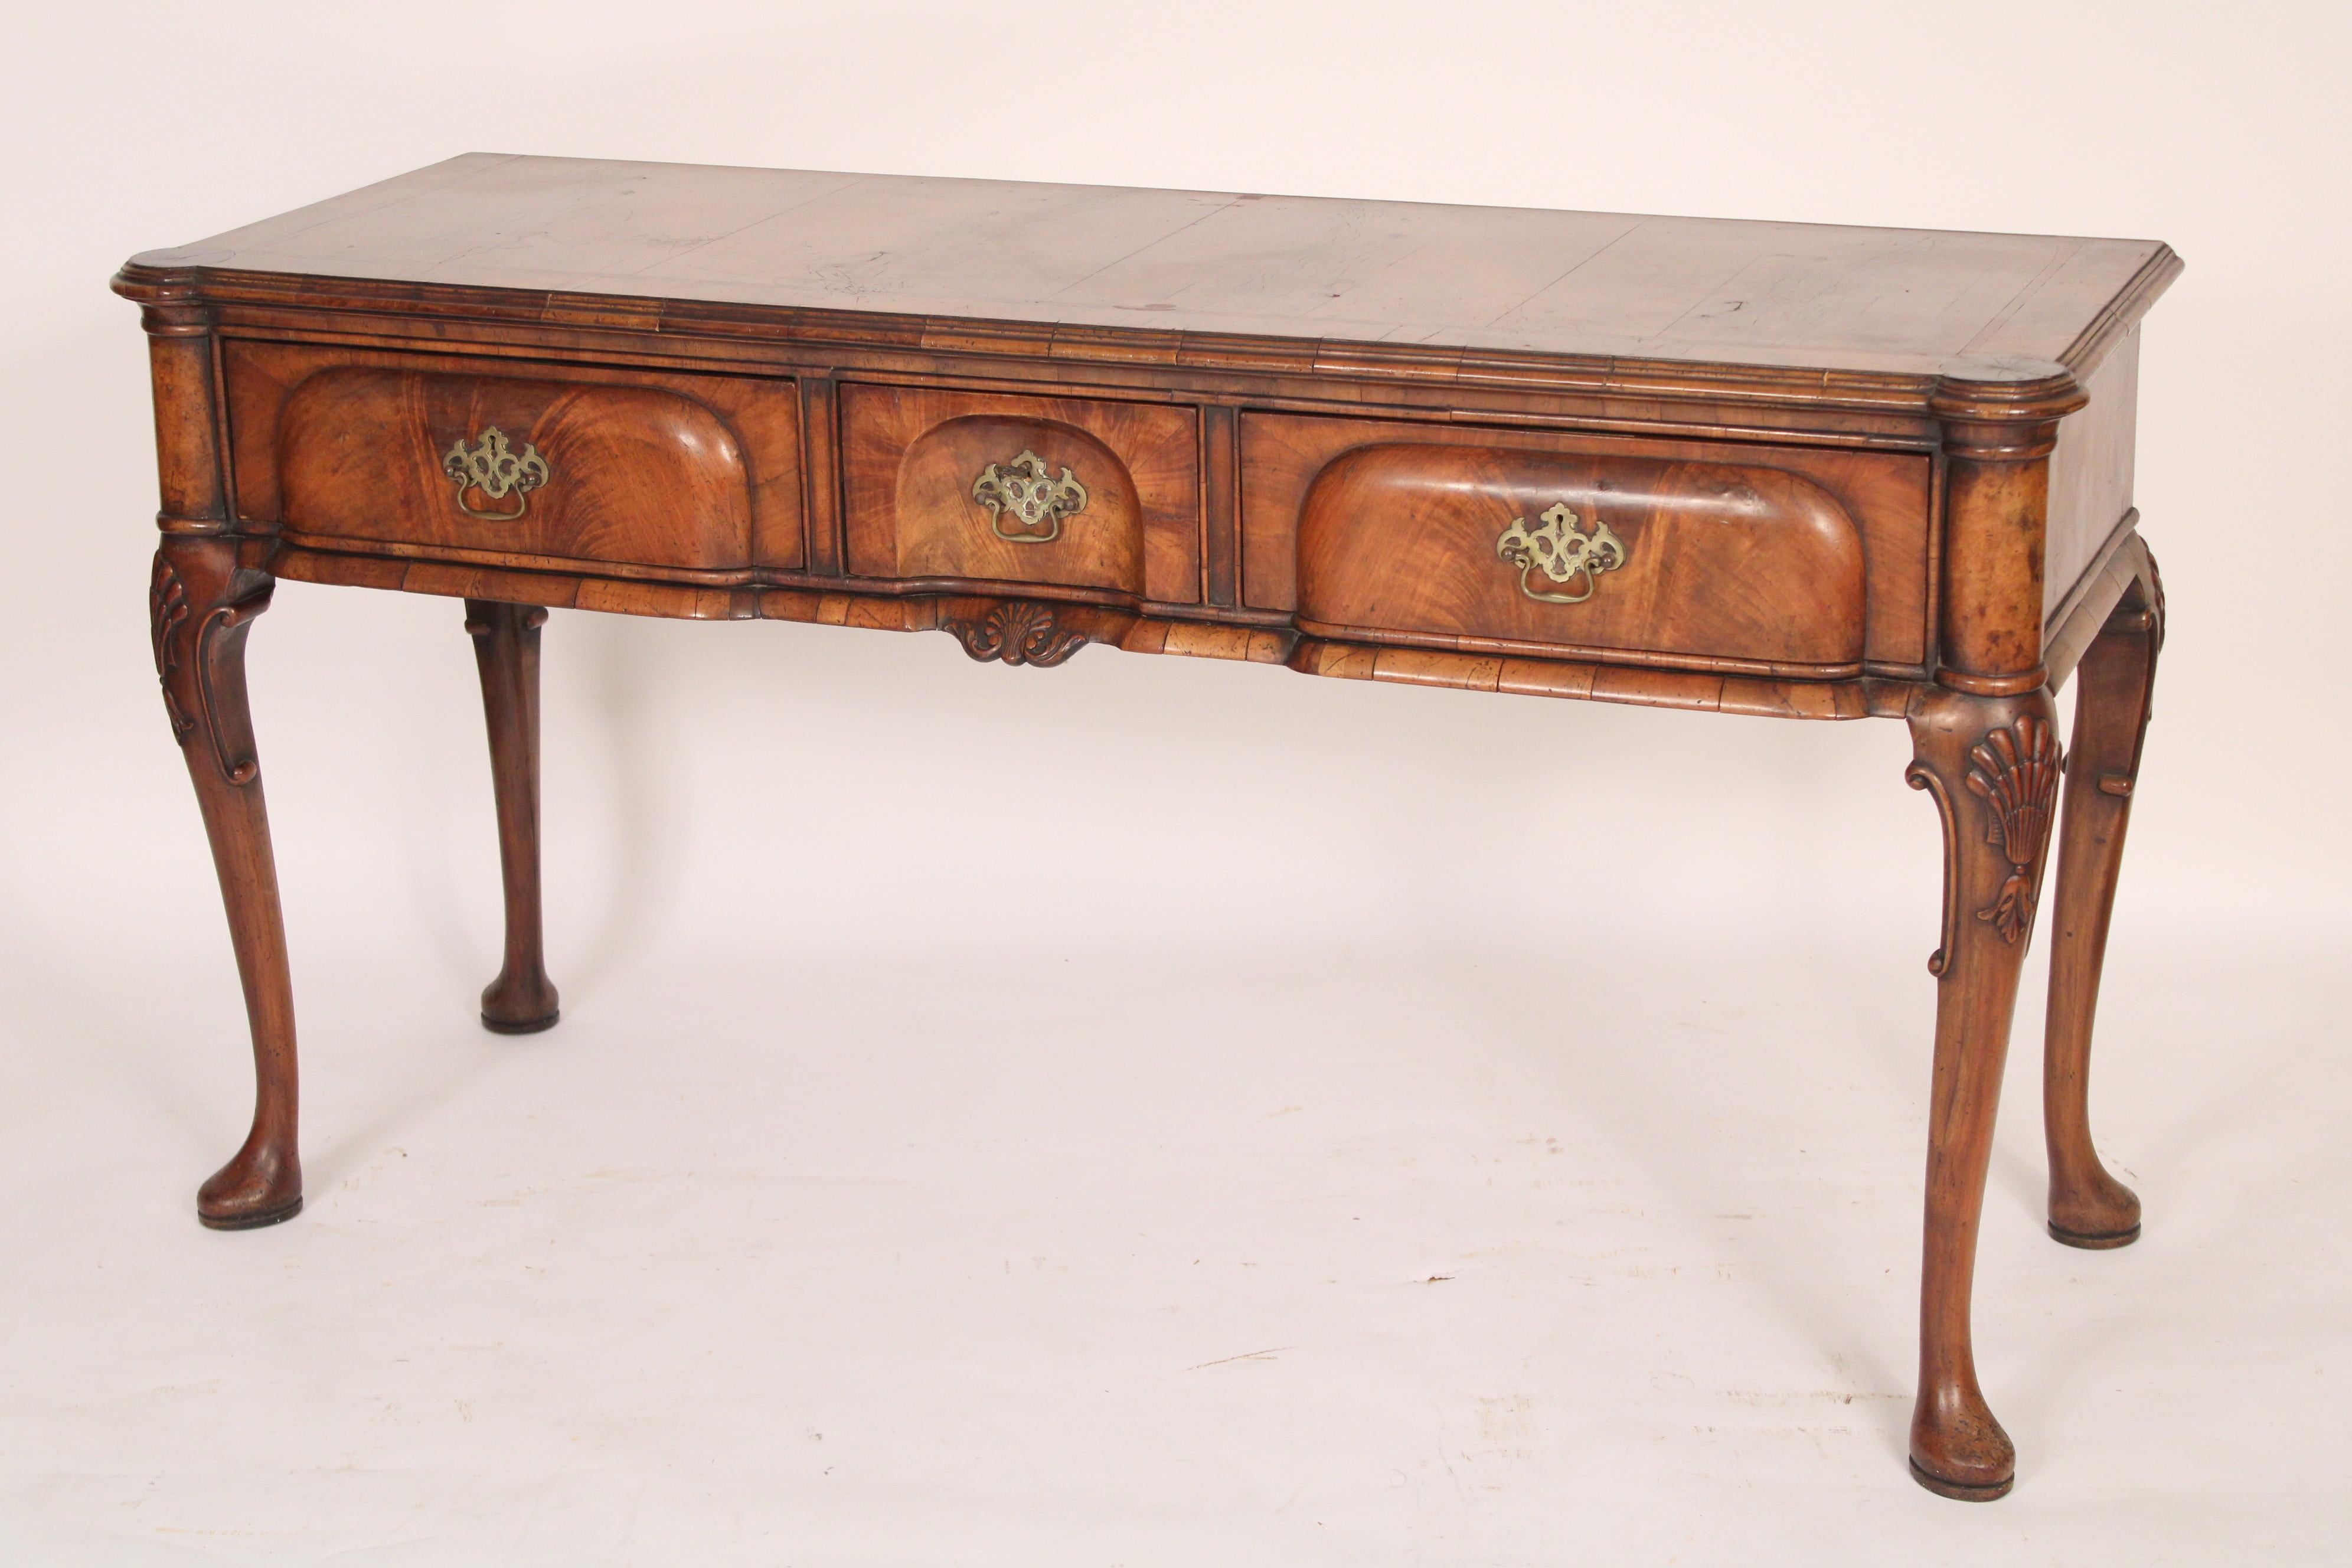 English Antique Queen Anne Style Mahogany Sideboard / Console Table